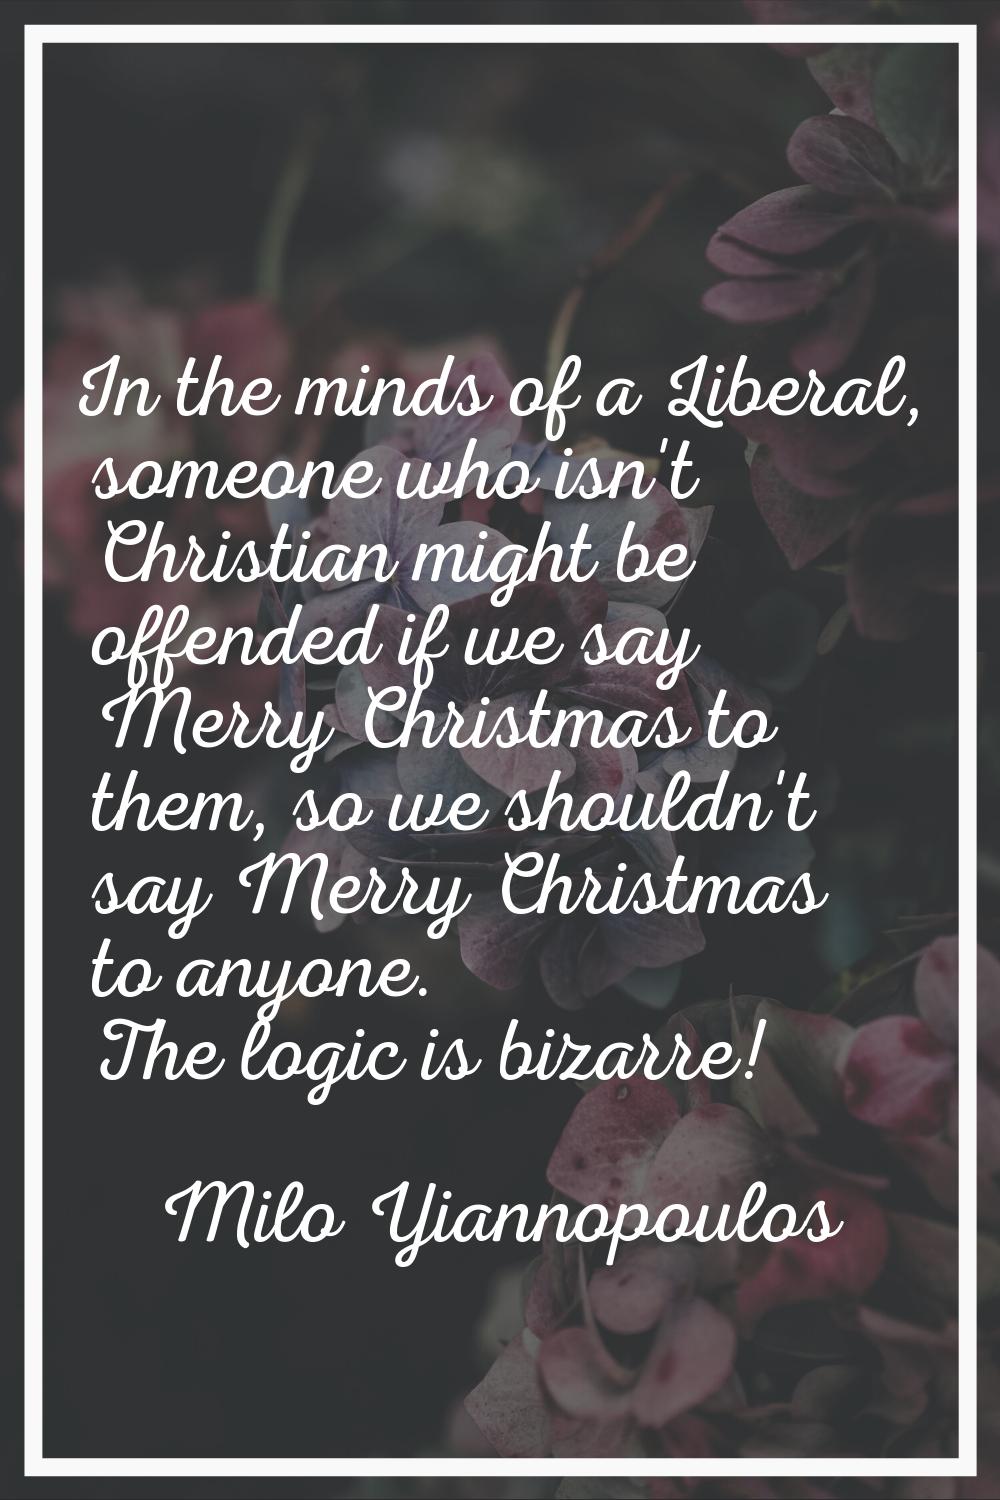 In the minds of a Liberal, someone who isn't Christian might be offended if we say Merry Christmas 